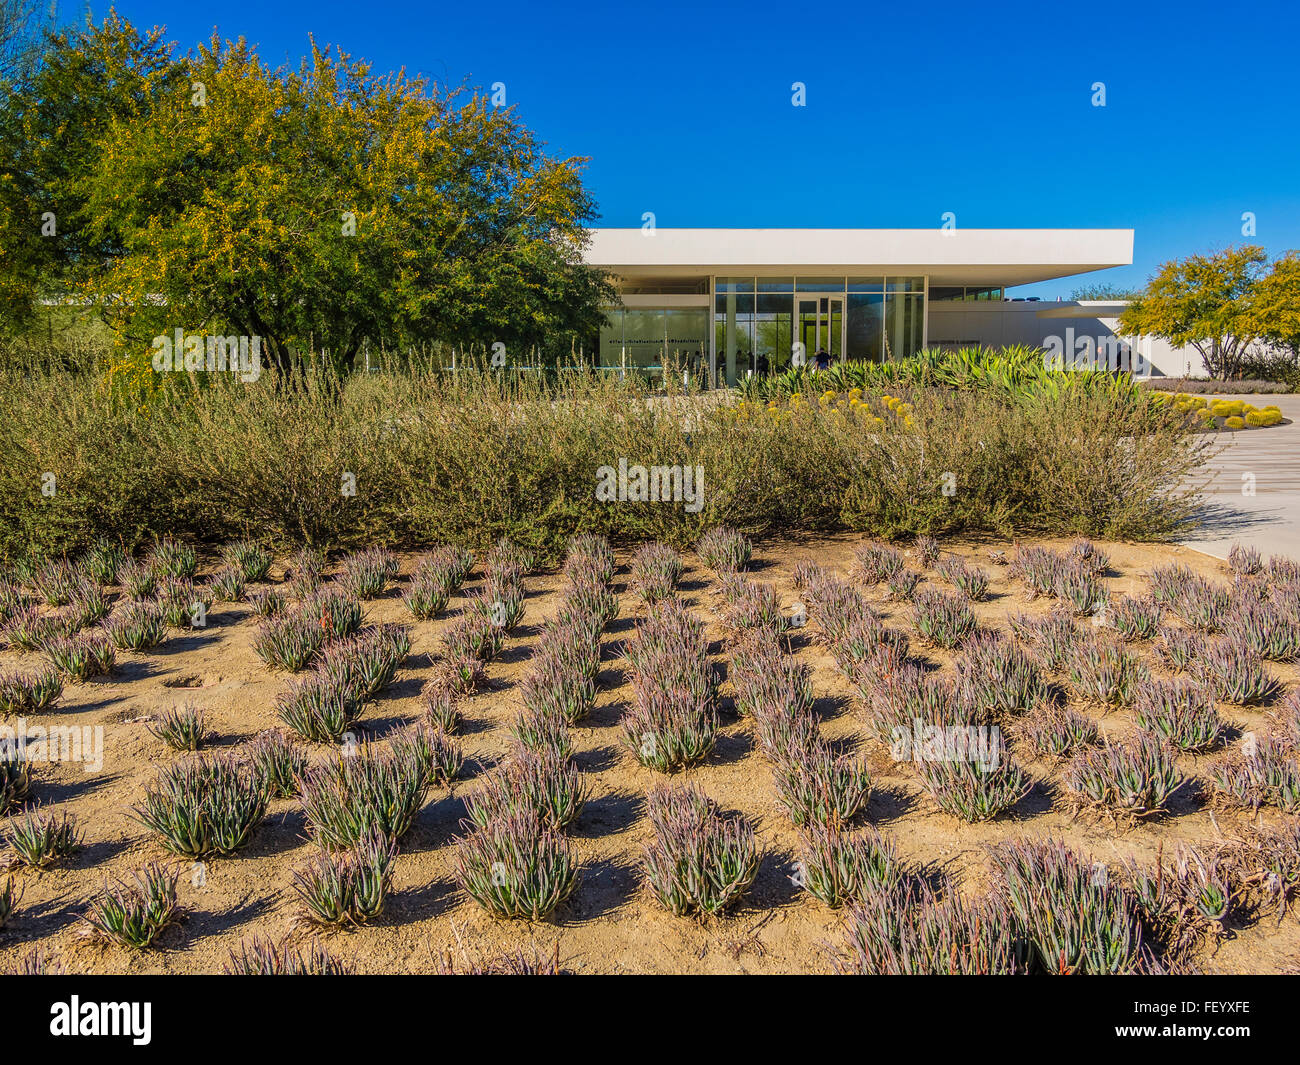 A View Of The Front Of The Sunnylands Center Gardens Visitor